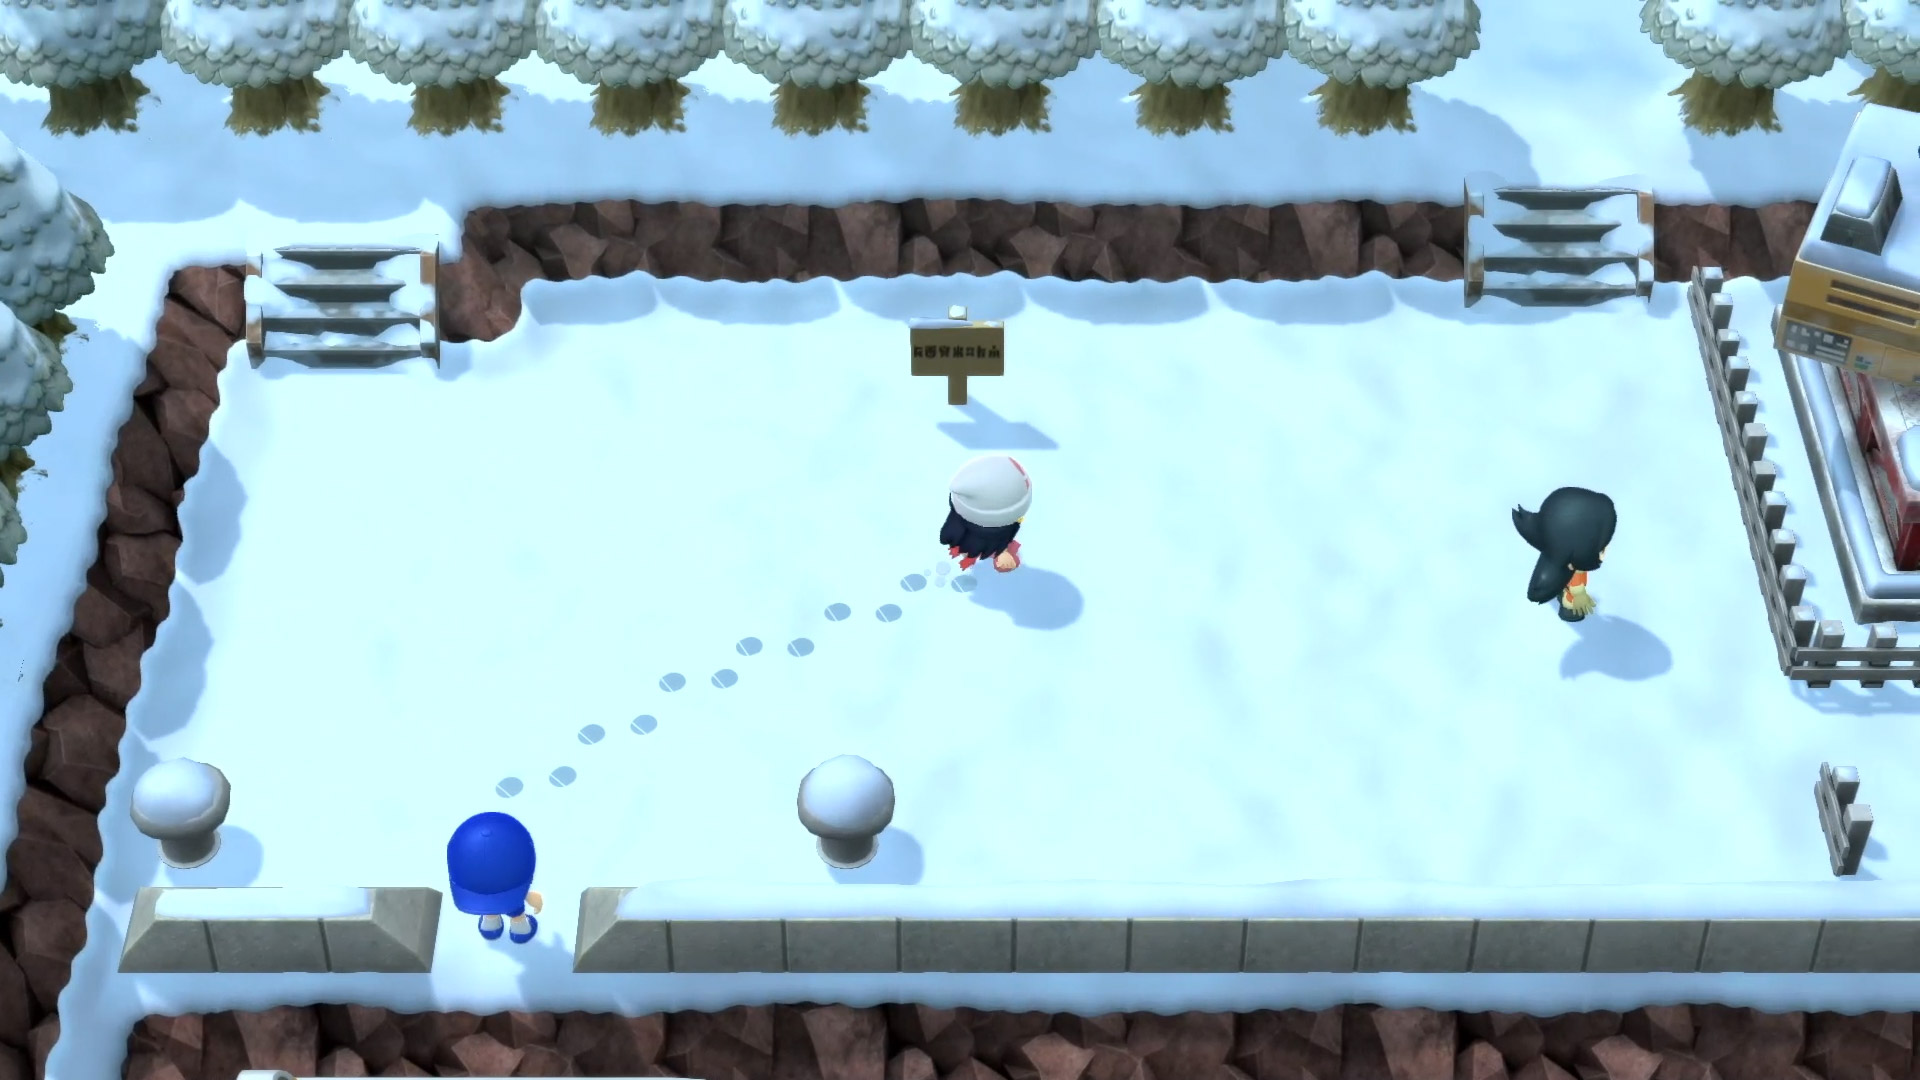 Pokémon Brilliant Diamond and Shining Pearl: A view of a character running through snow, leaving footprints behind them, as seen from above.